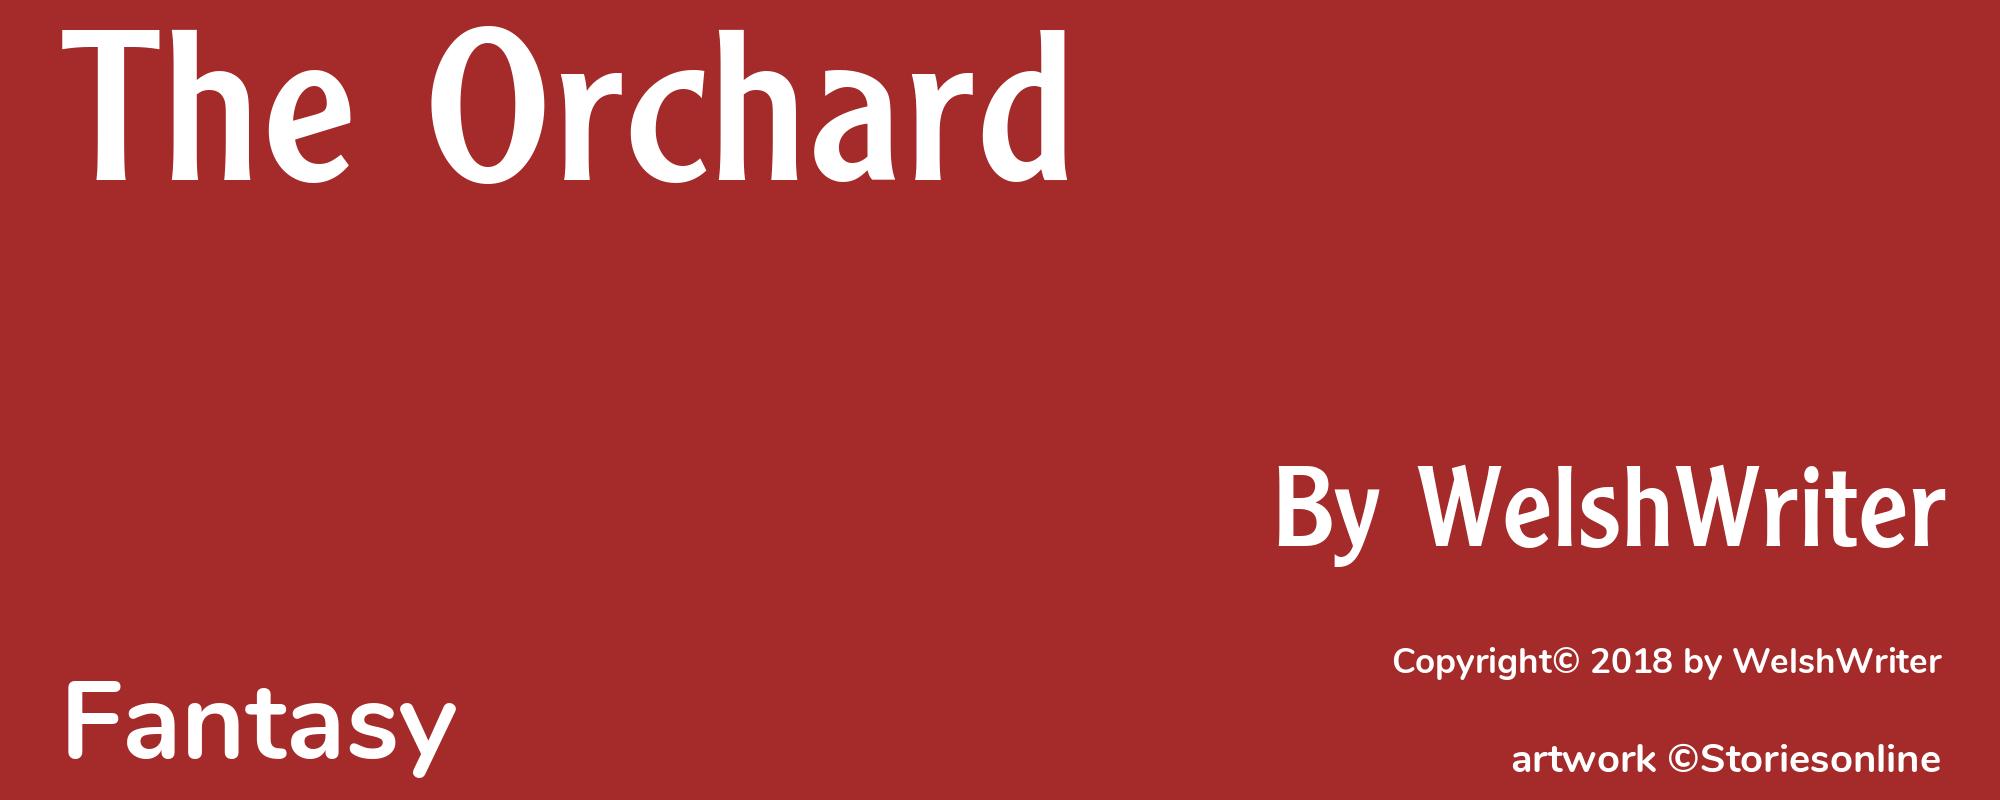 The Orchard - Cover